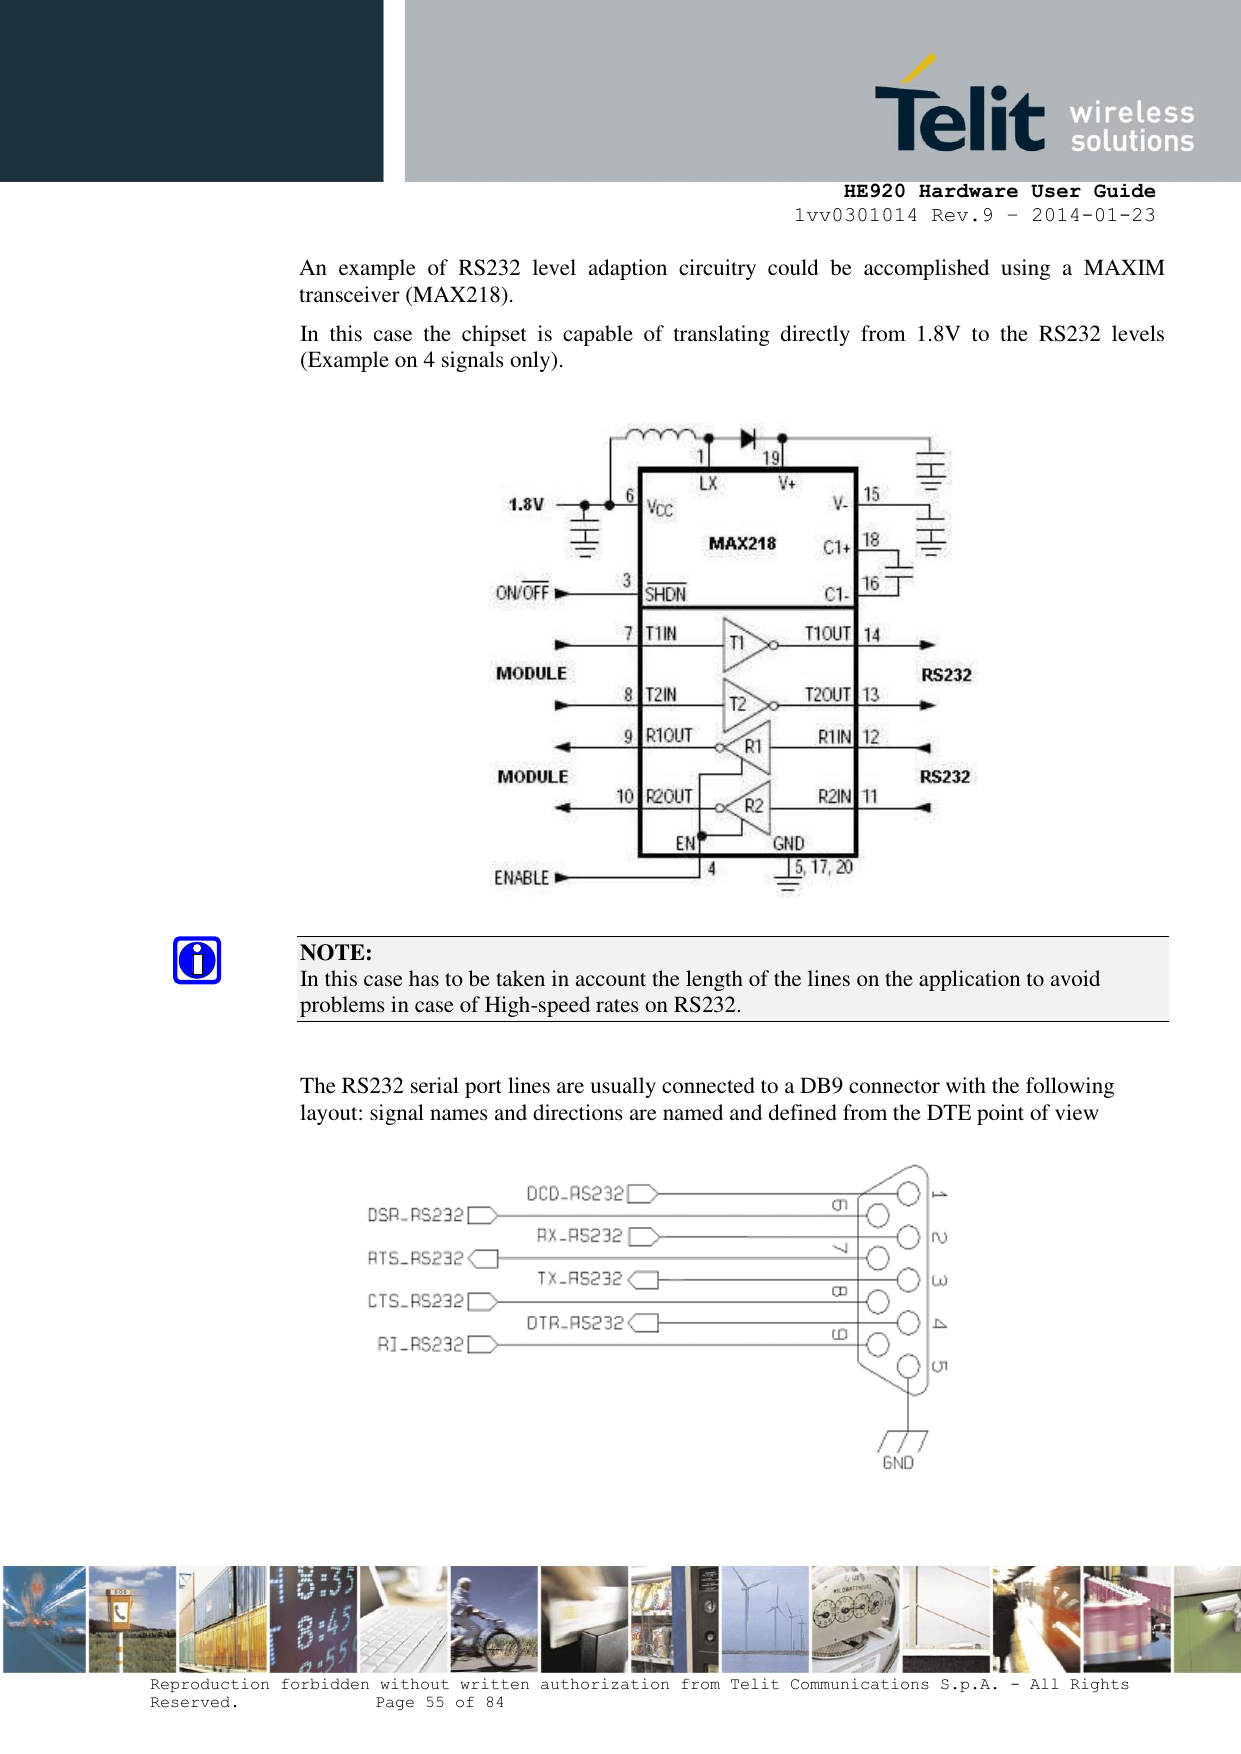     HE920 Hardware User Guide 1vv0301014 Rev.9 – 2014-01-23 Reproduction forbidden without written authorization from Telit Communications S.p.A. - All Rights Reserved.    Page 55 of 84  An  example  of  RS232  level  adaption  circuitry  could  be  accomplished  using  a  MAXIM transceiver (MAX218).  In  this  case  the  chipset  is  capable  of  translating  directly  from  1.8V  to  the  RS232  levels (Example on 4 signals only).    NOTE:  In this case has to be taken in account the length of the lines on the application to avoid problems in case of High-speed rates on RS232.  The RS232 serial port lines are usually connected to a DB9 connector with the following layout: signal names and directions are named and defined from the DTE point of view  